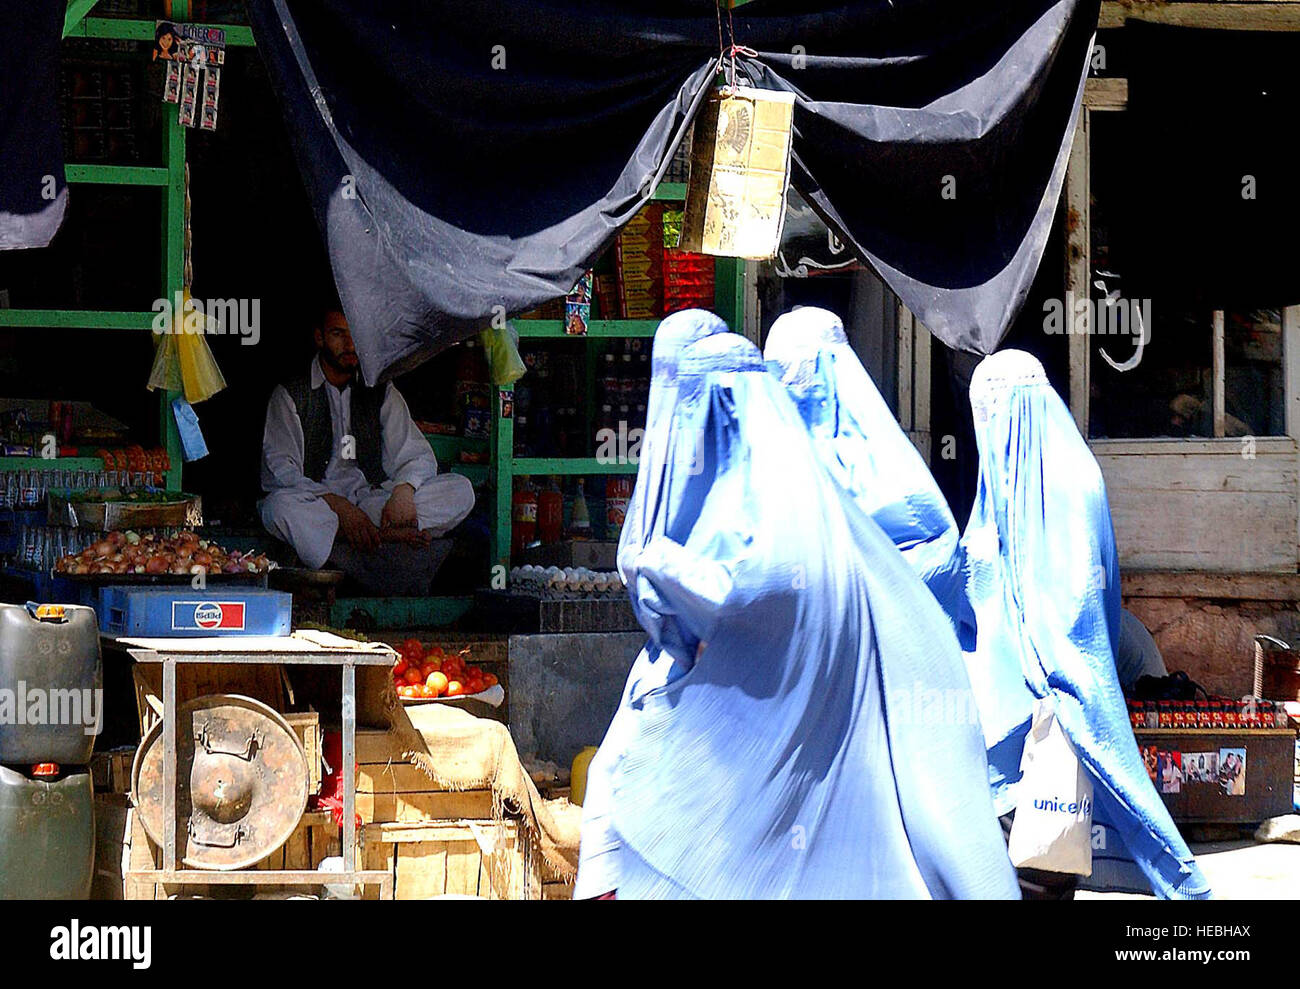 Even though the Taliban have been removed from power in Afghanistan, many of the Muslim women still adhere to the strict interpretation of Muslim law that the Taliban mandated. These women shopping at a market in the Parwan Province of Afghanistan, Sept. 8, 2002, still wear the traditional Burka while in public. (U.S. Air Force photo by Staff Sgt. Derrick C. Goode) (Released) Stock Photo